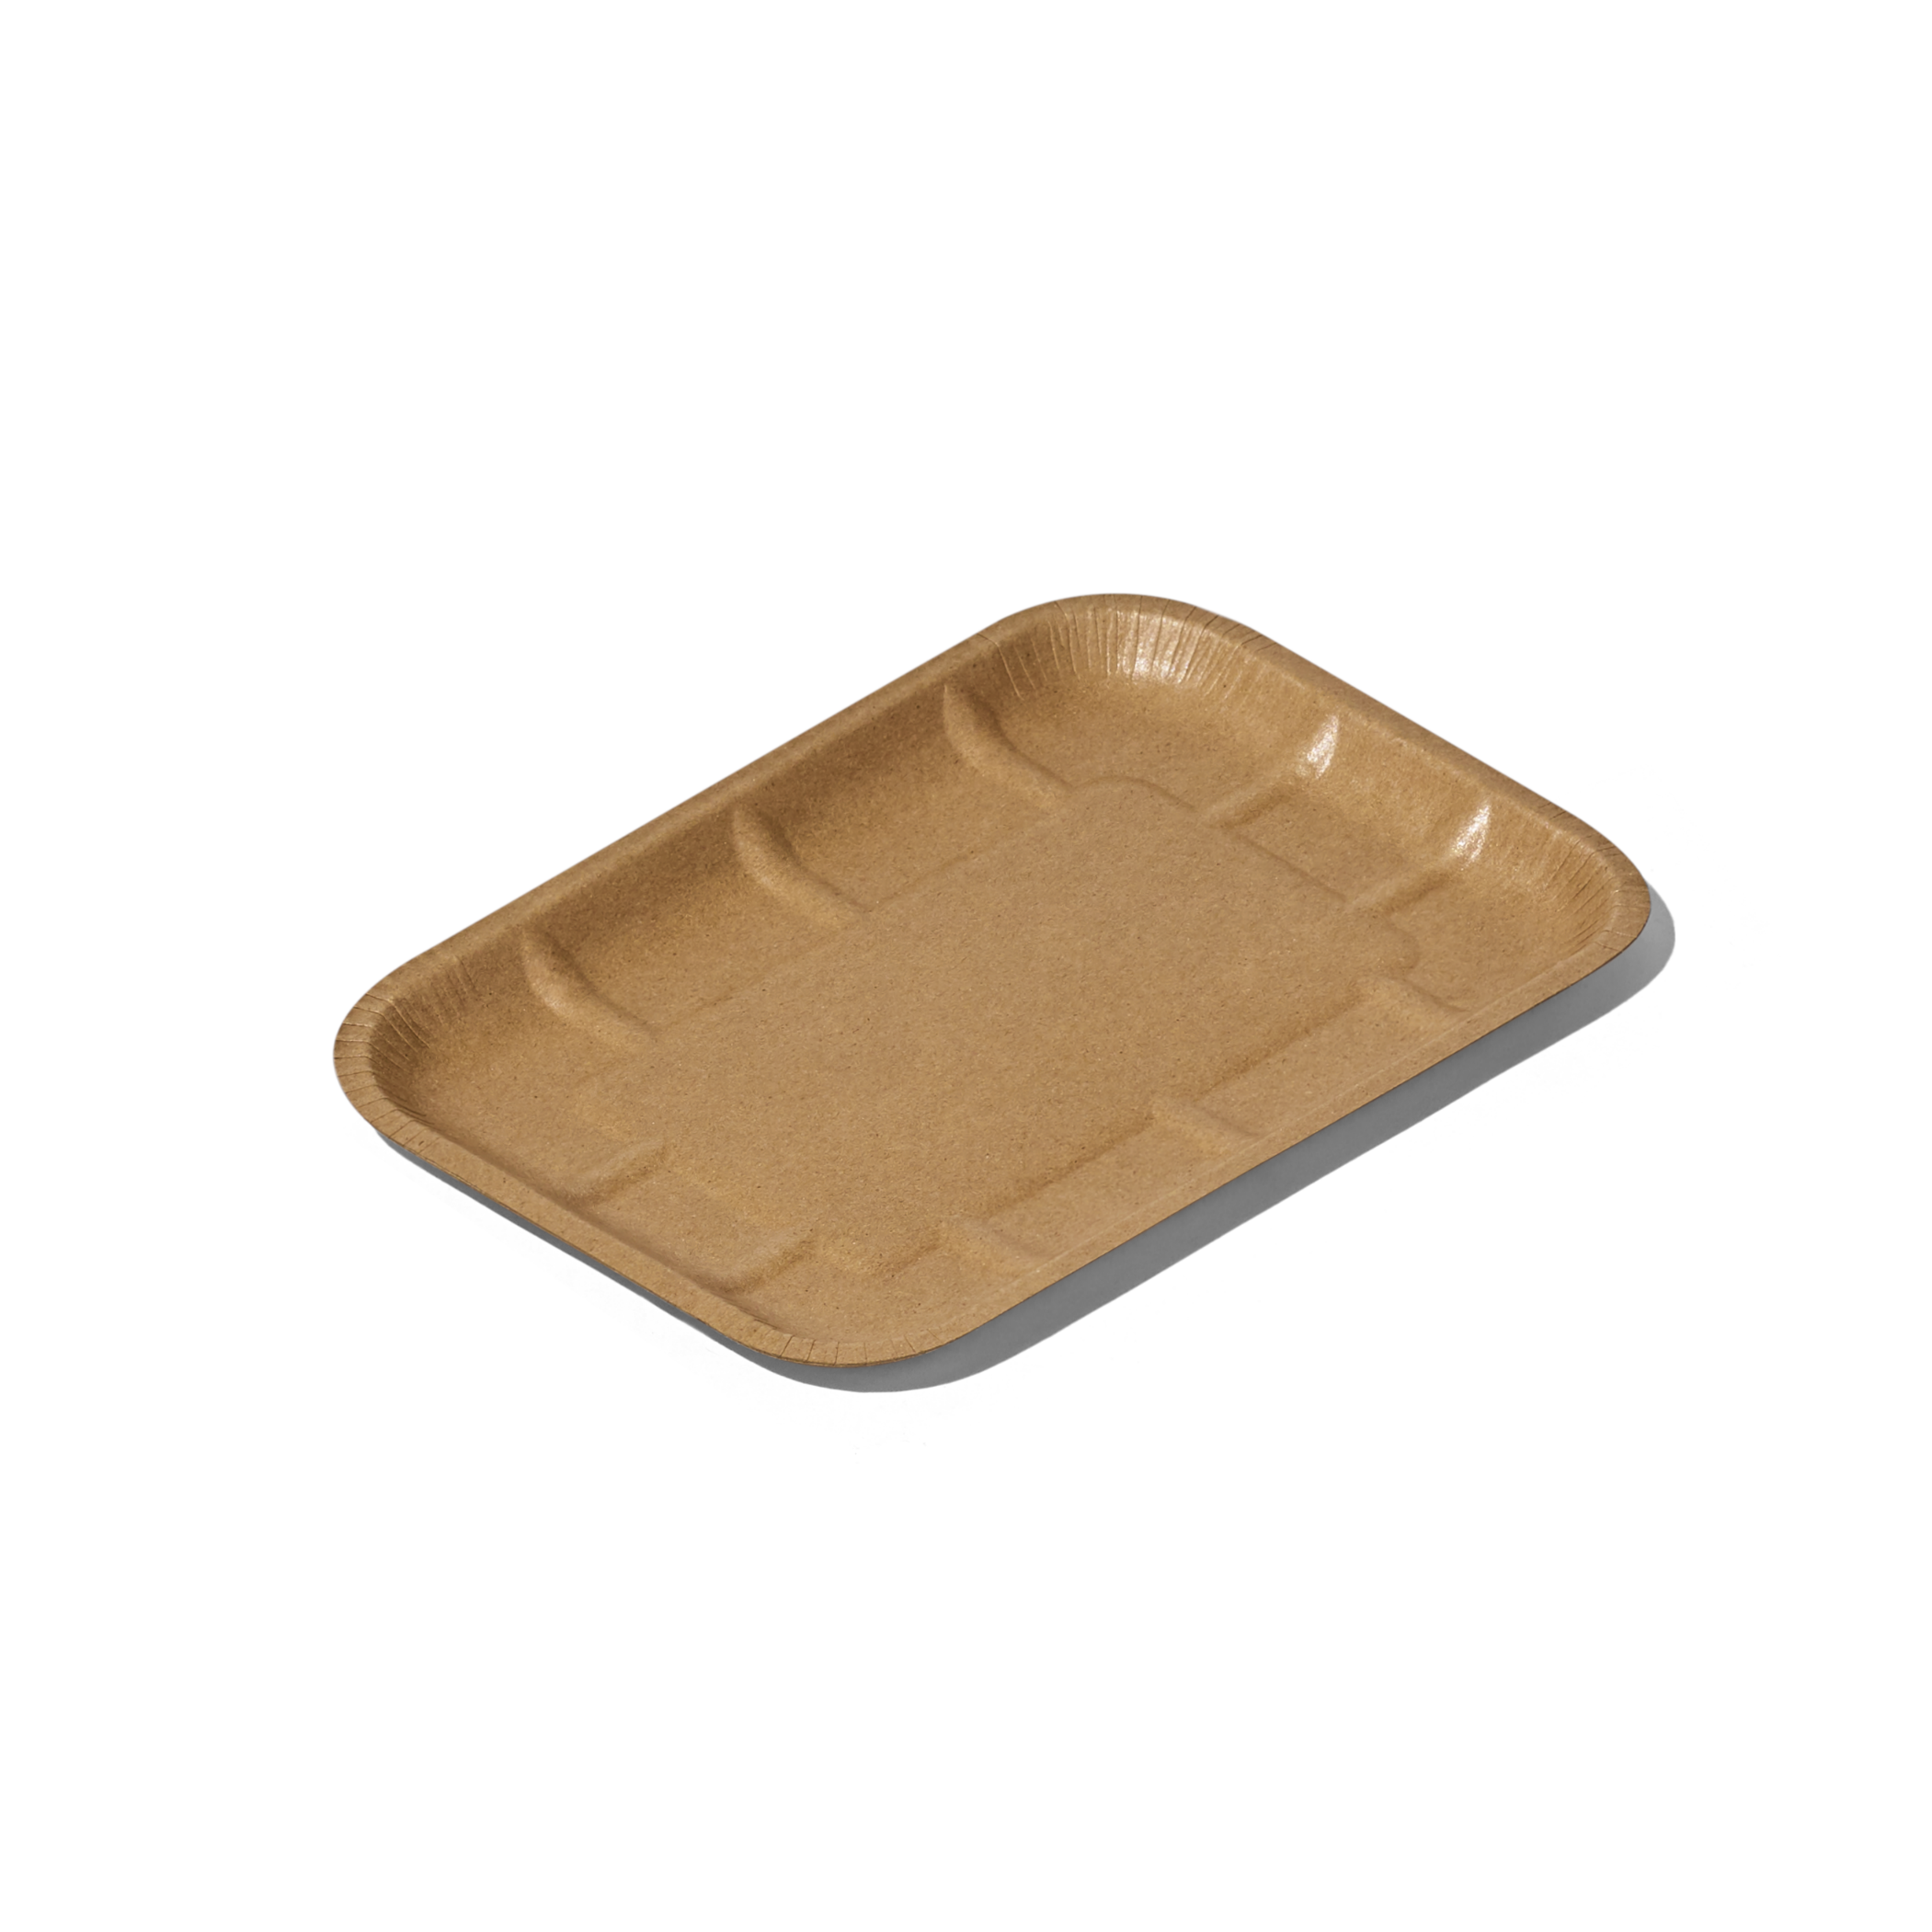 Disposable Food Trays: Lunch Trays, Packaging Trays, & More